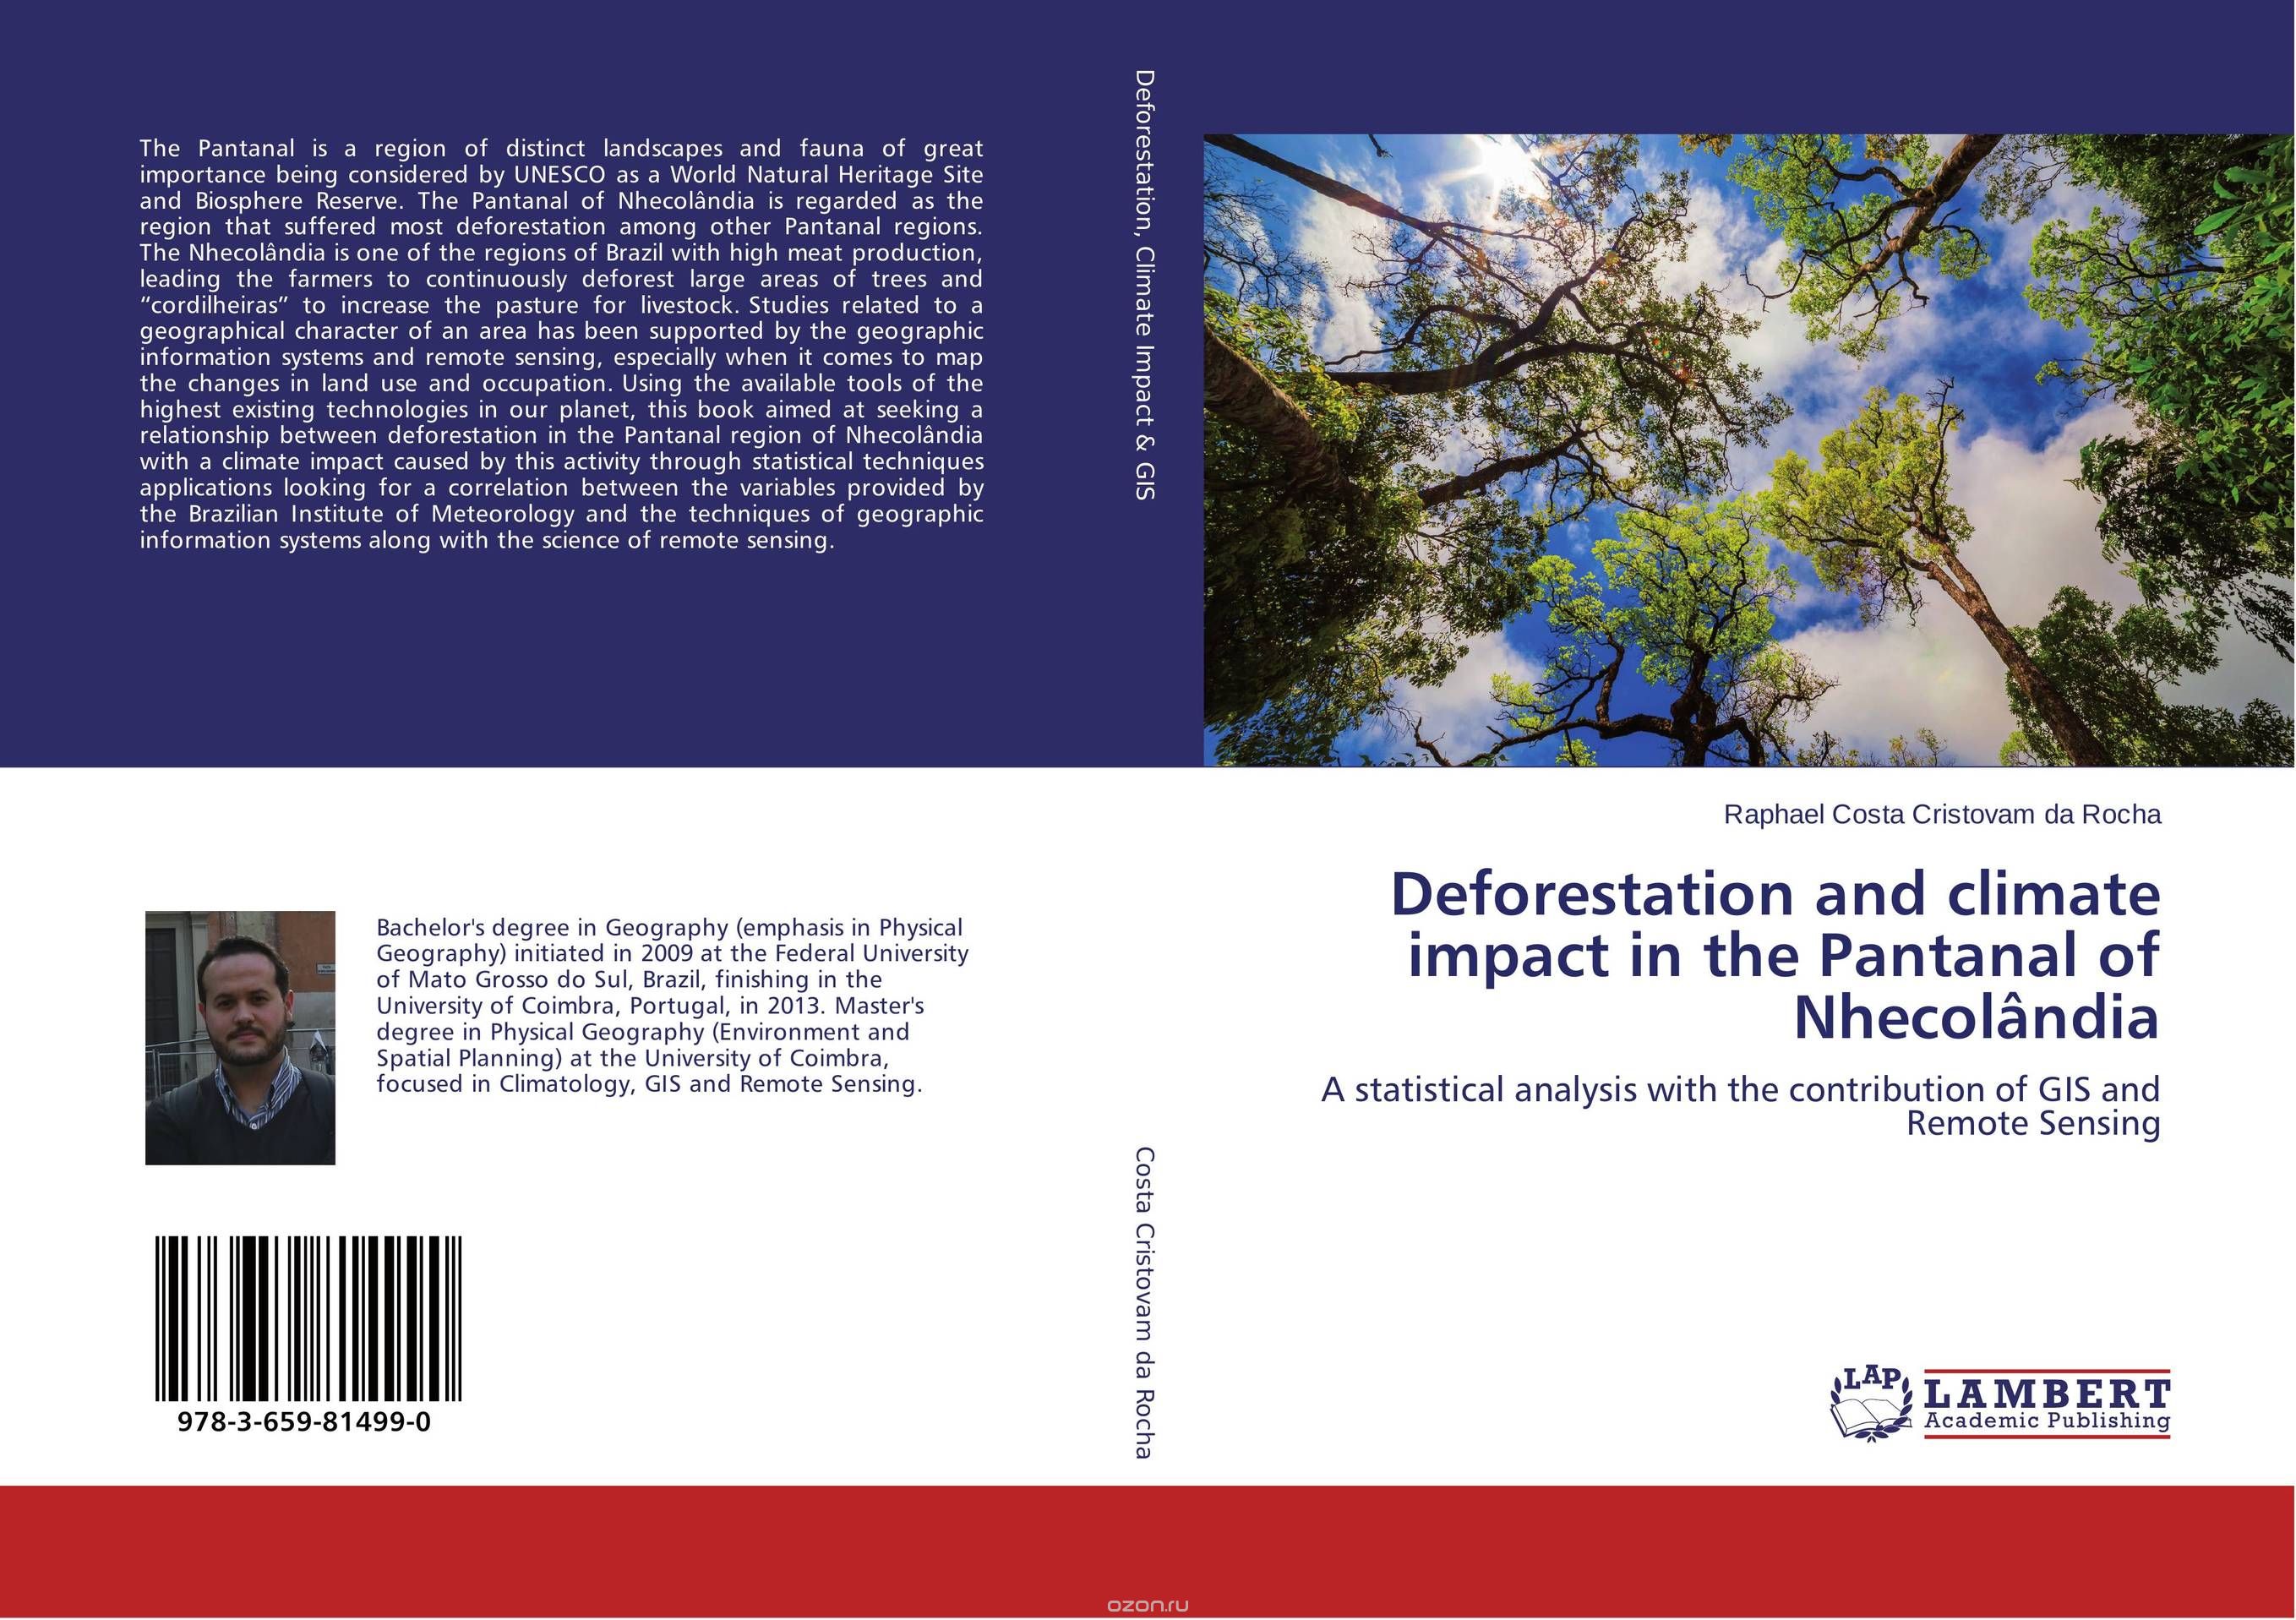 Скачать книгу "Deforestation and climate impact in the Pantanal of Nhecolandia"